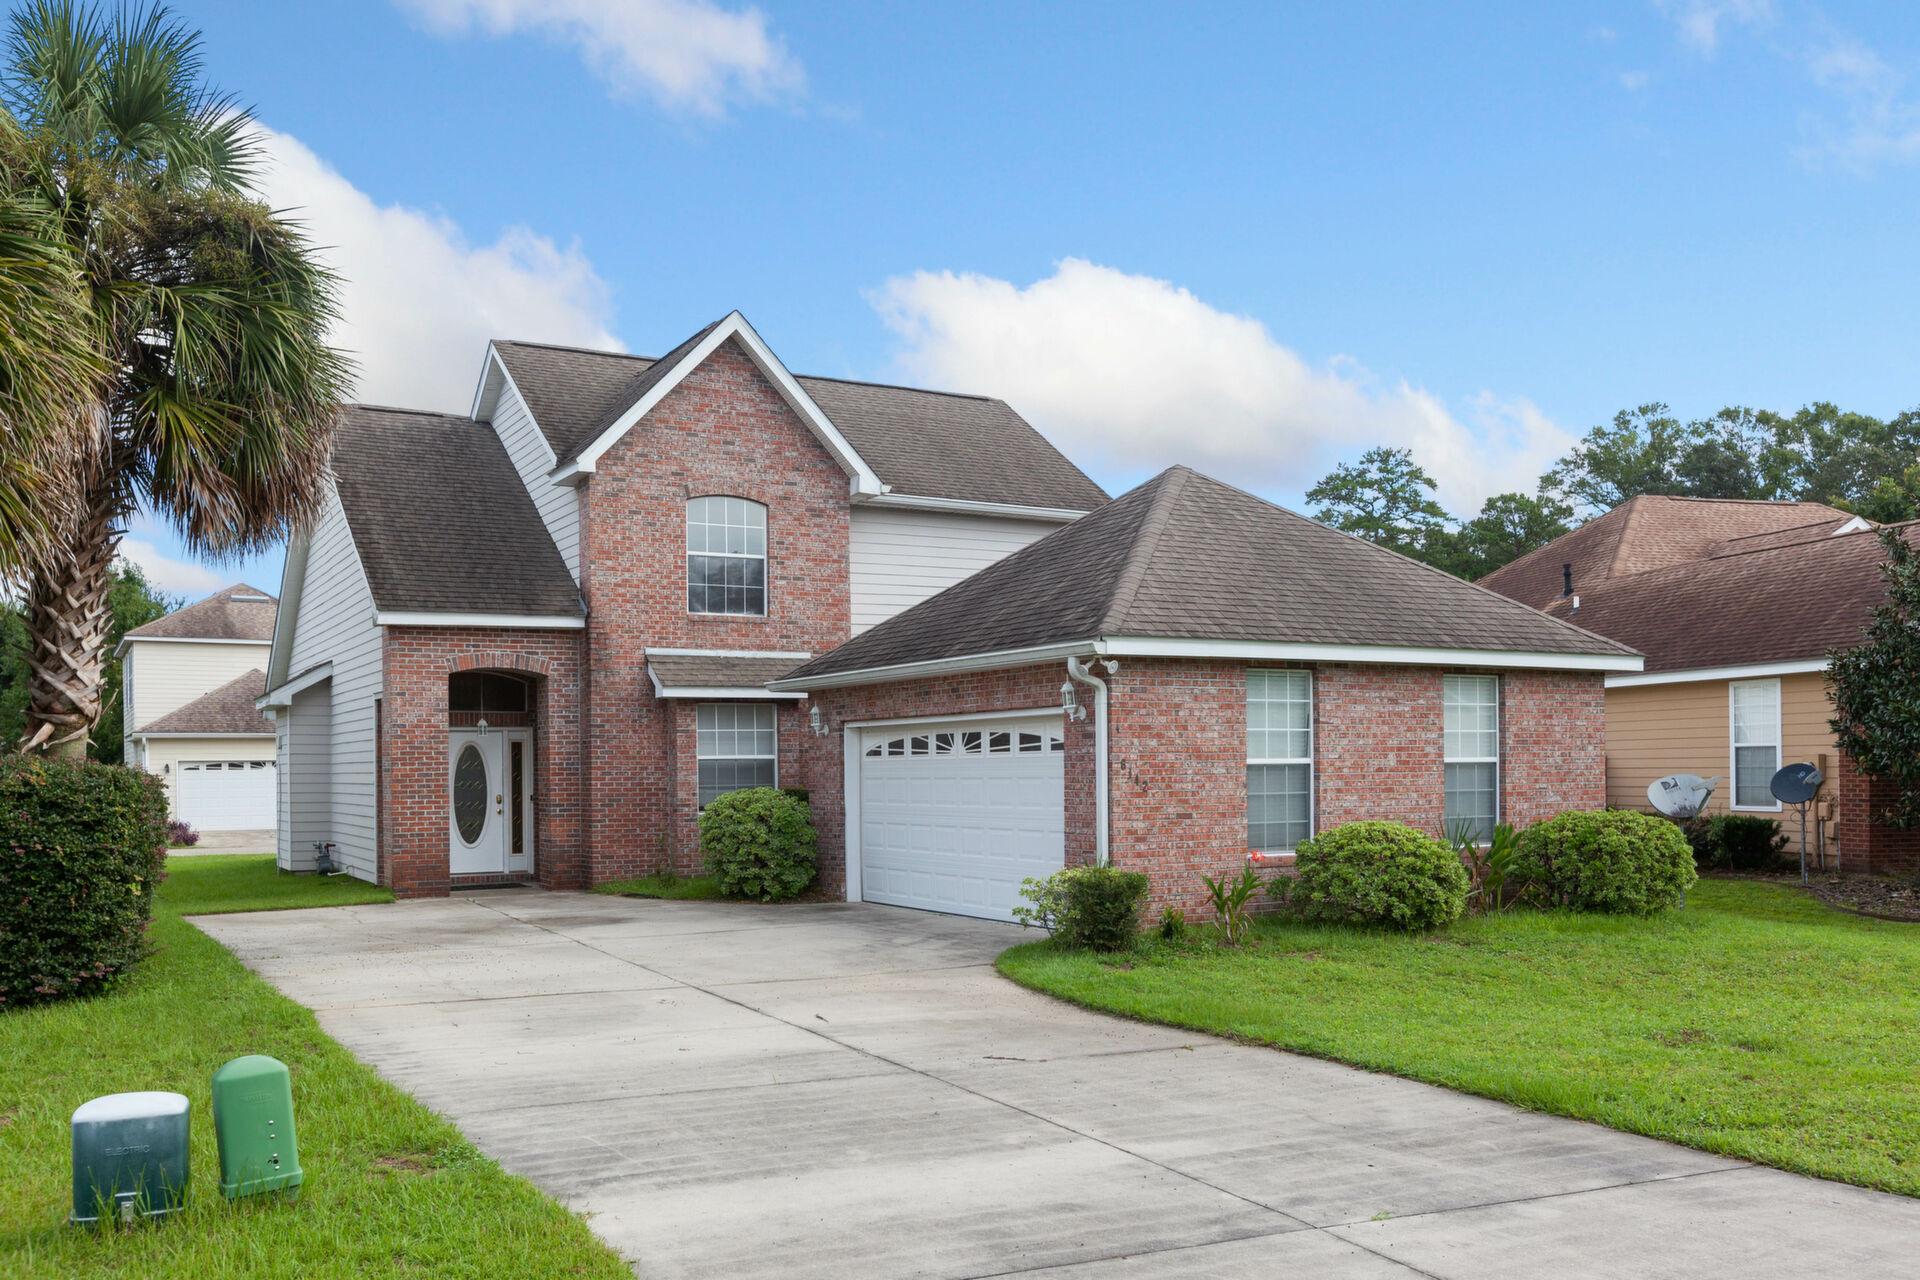 Photo of property: 6142 Eastfield Trail Tallahassee, FL 32317